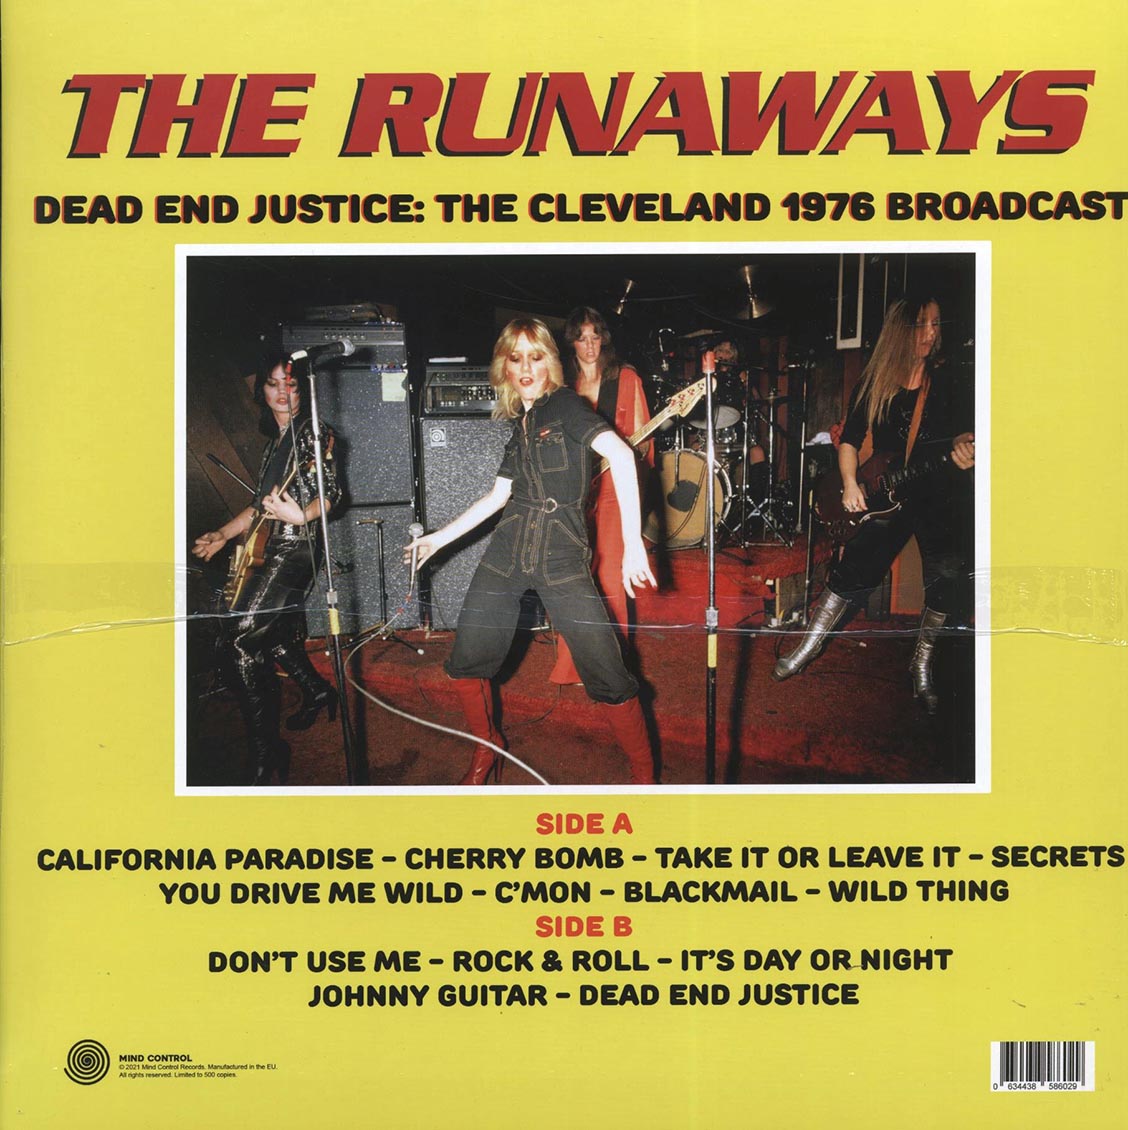 The Runaways - Dead End Justice: The Cleveland 1976 Broadcast (ltd. 500 copies made) - Vinyl LP, LP